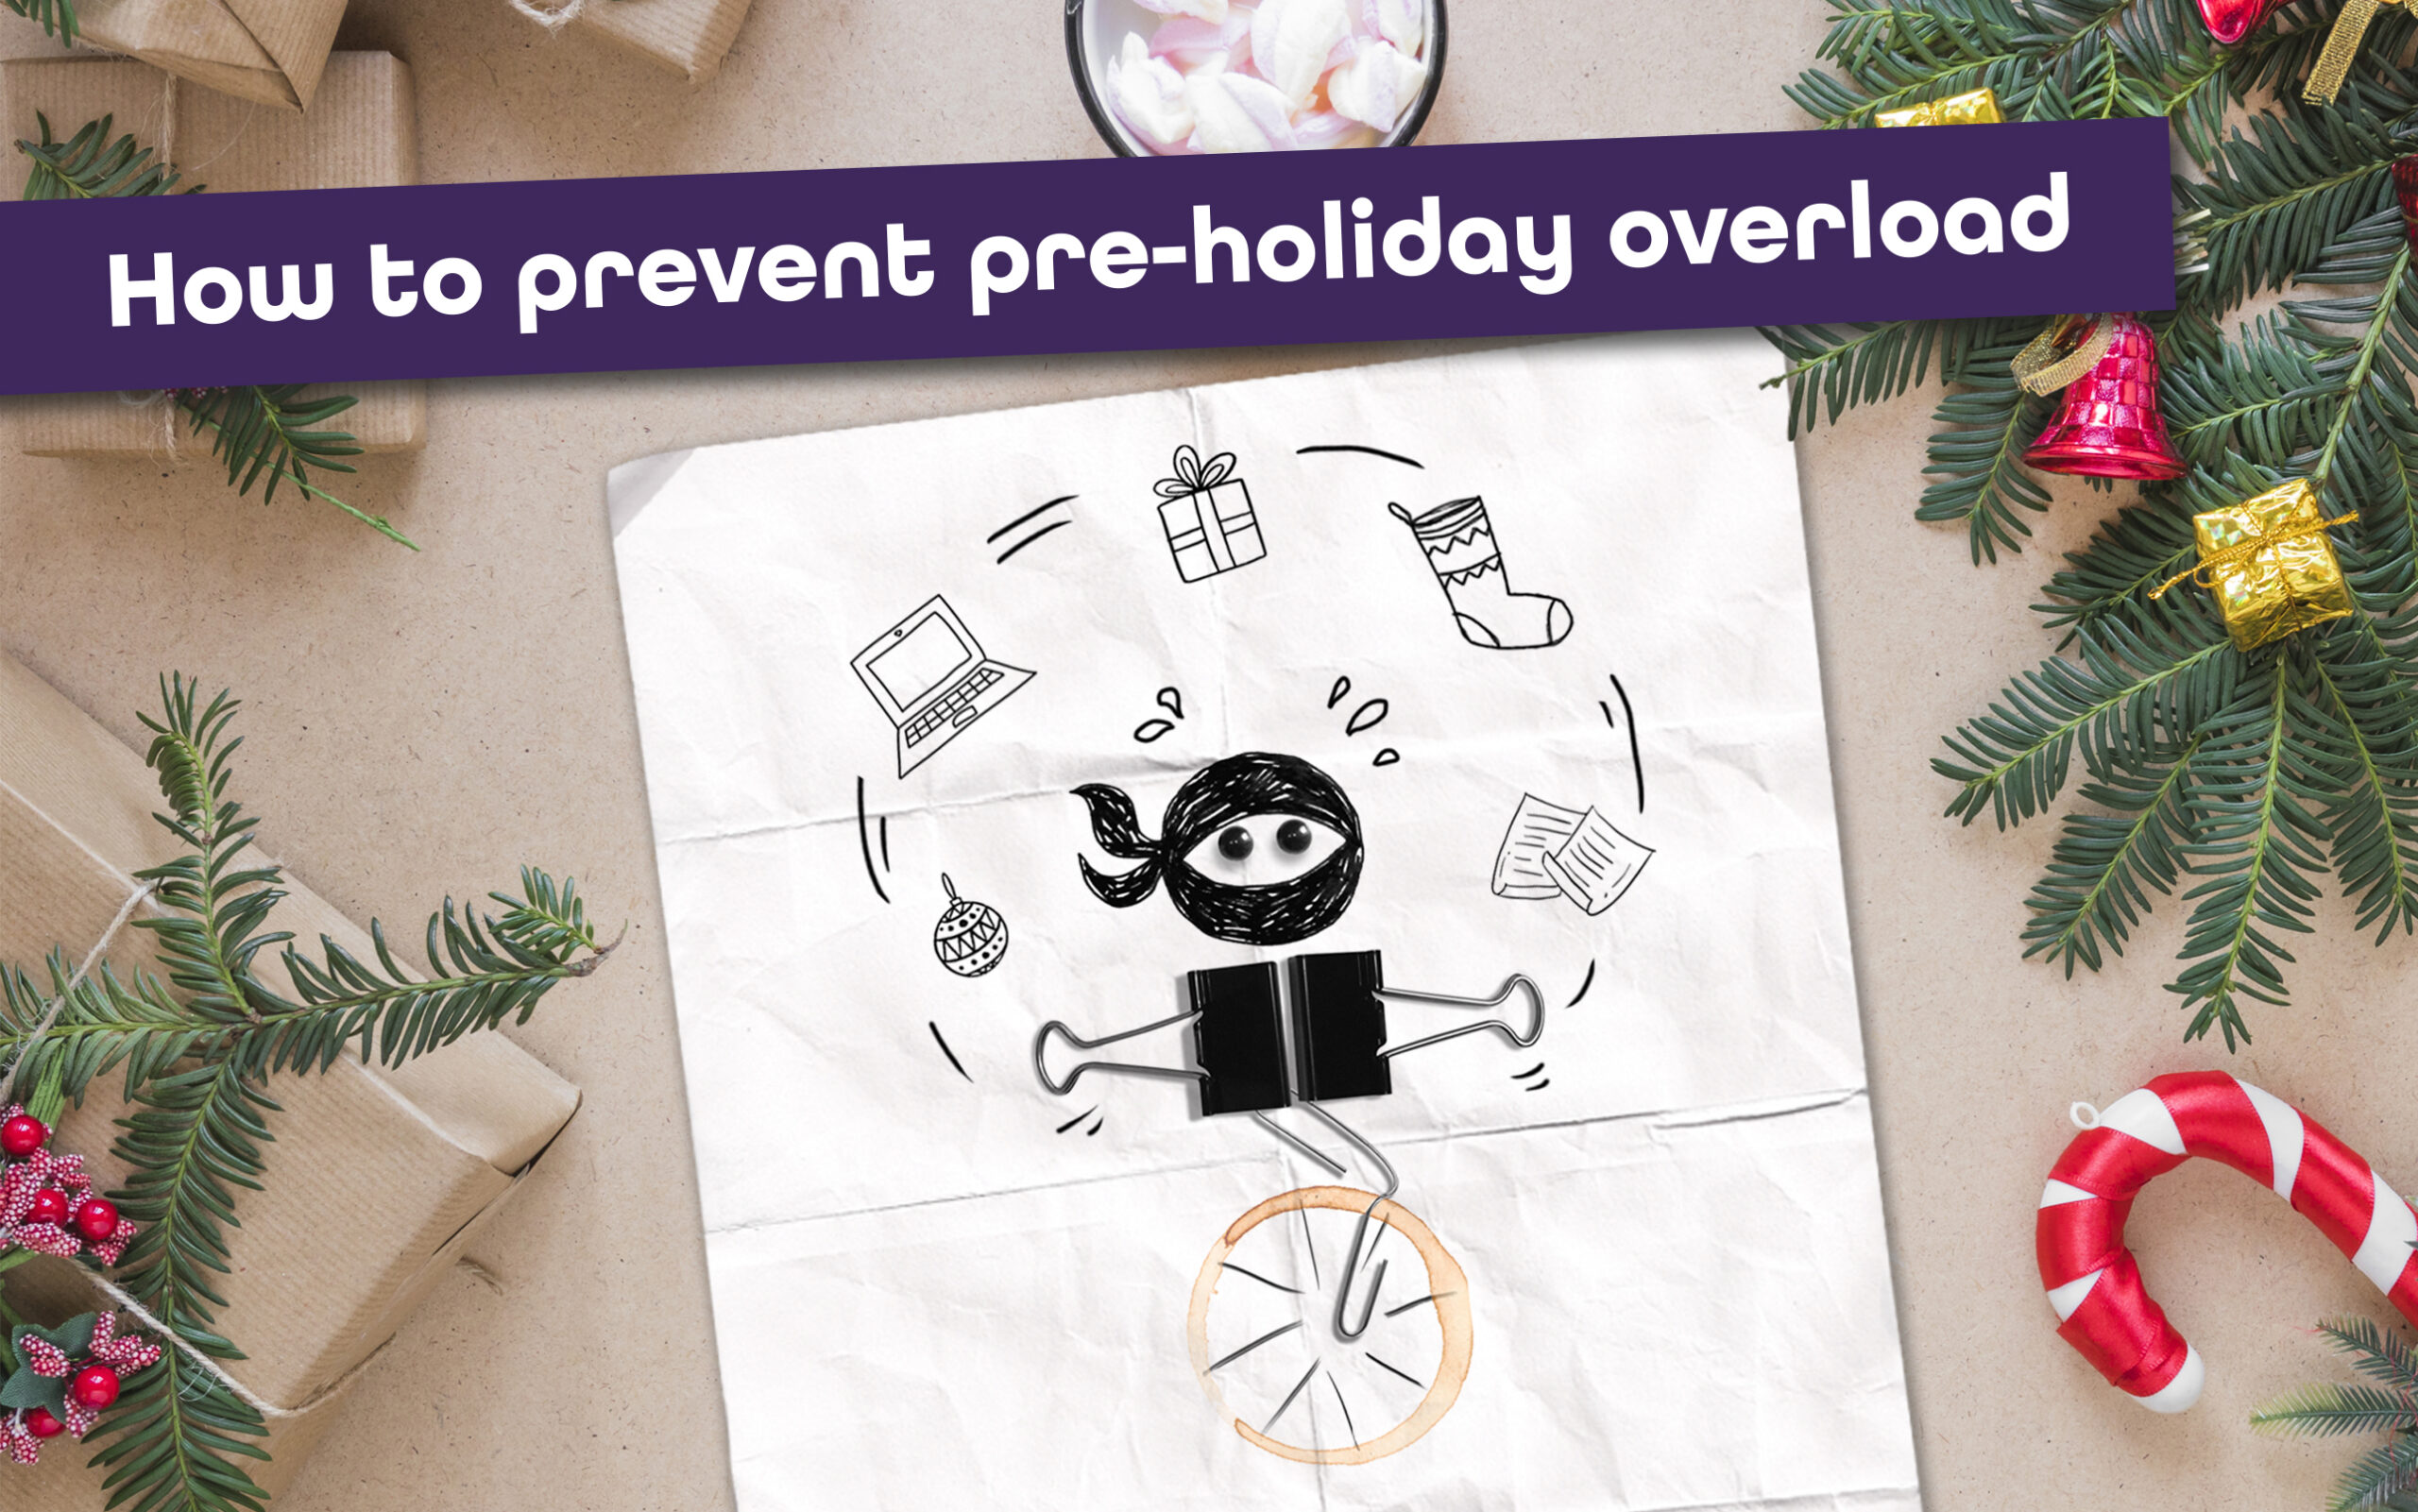 How to prevent pre-holiday overload